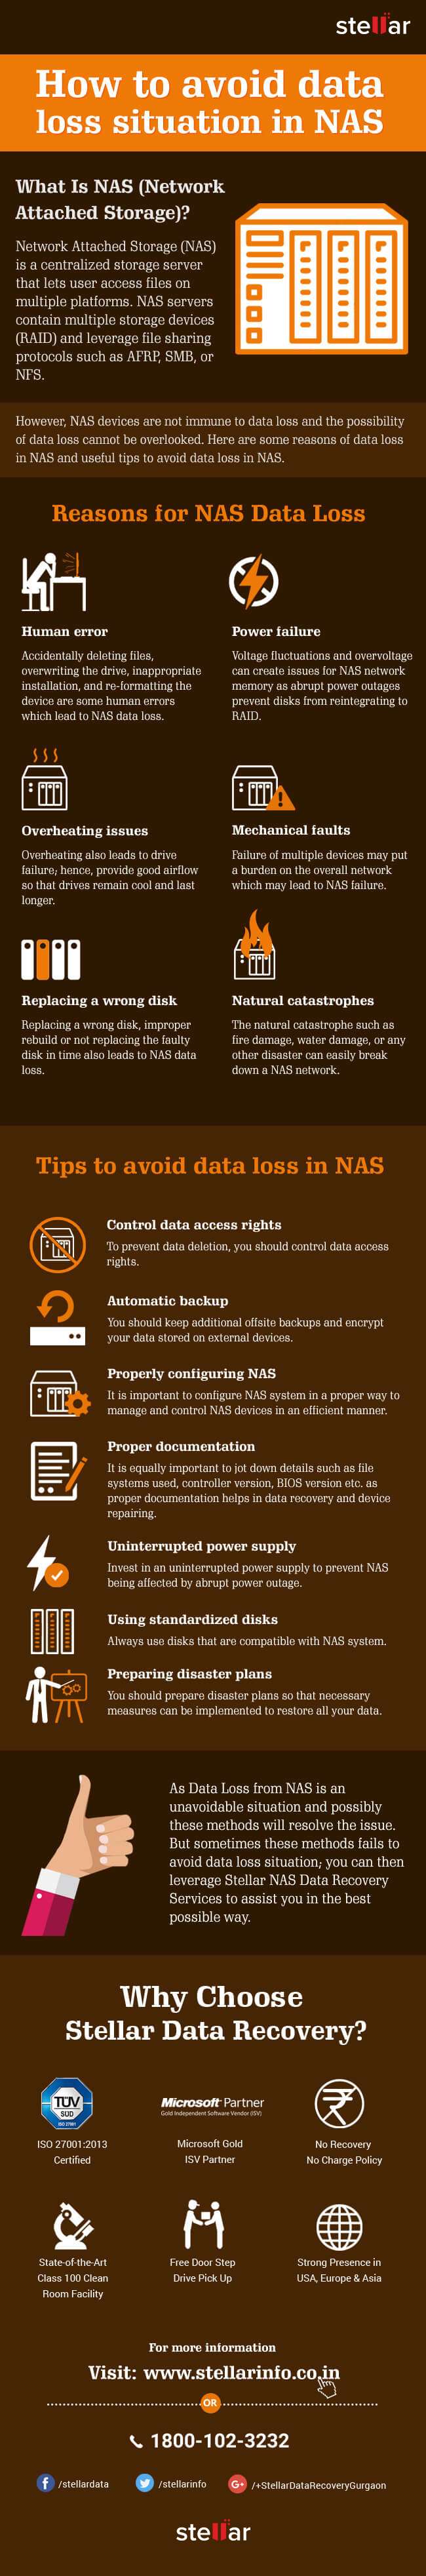 How to Avoid Data Loss in NAS System